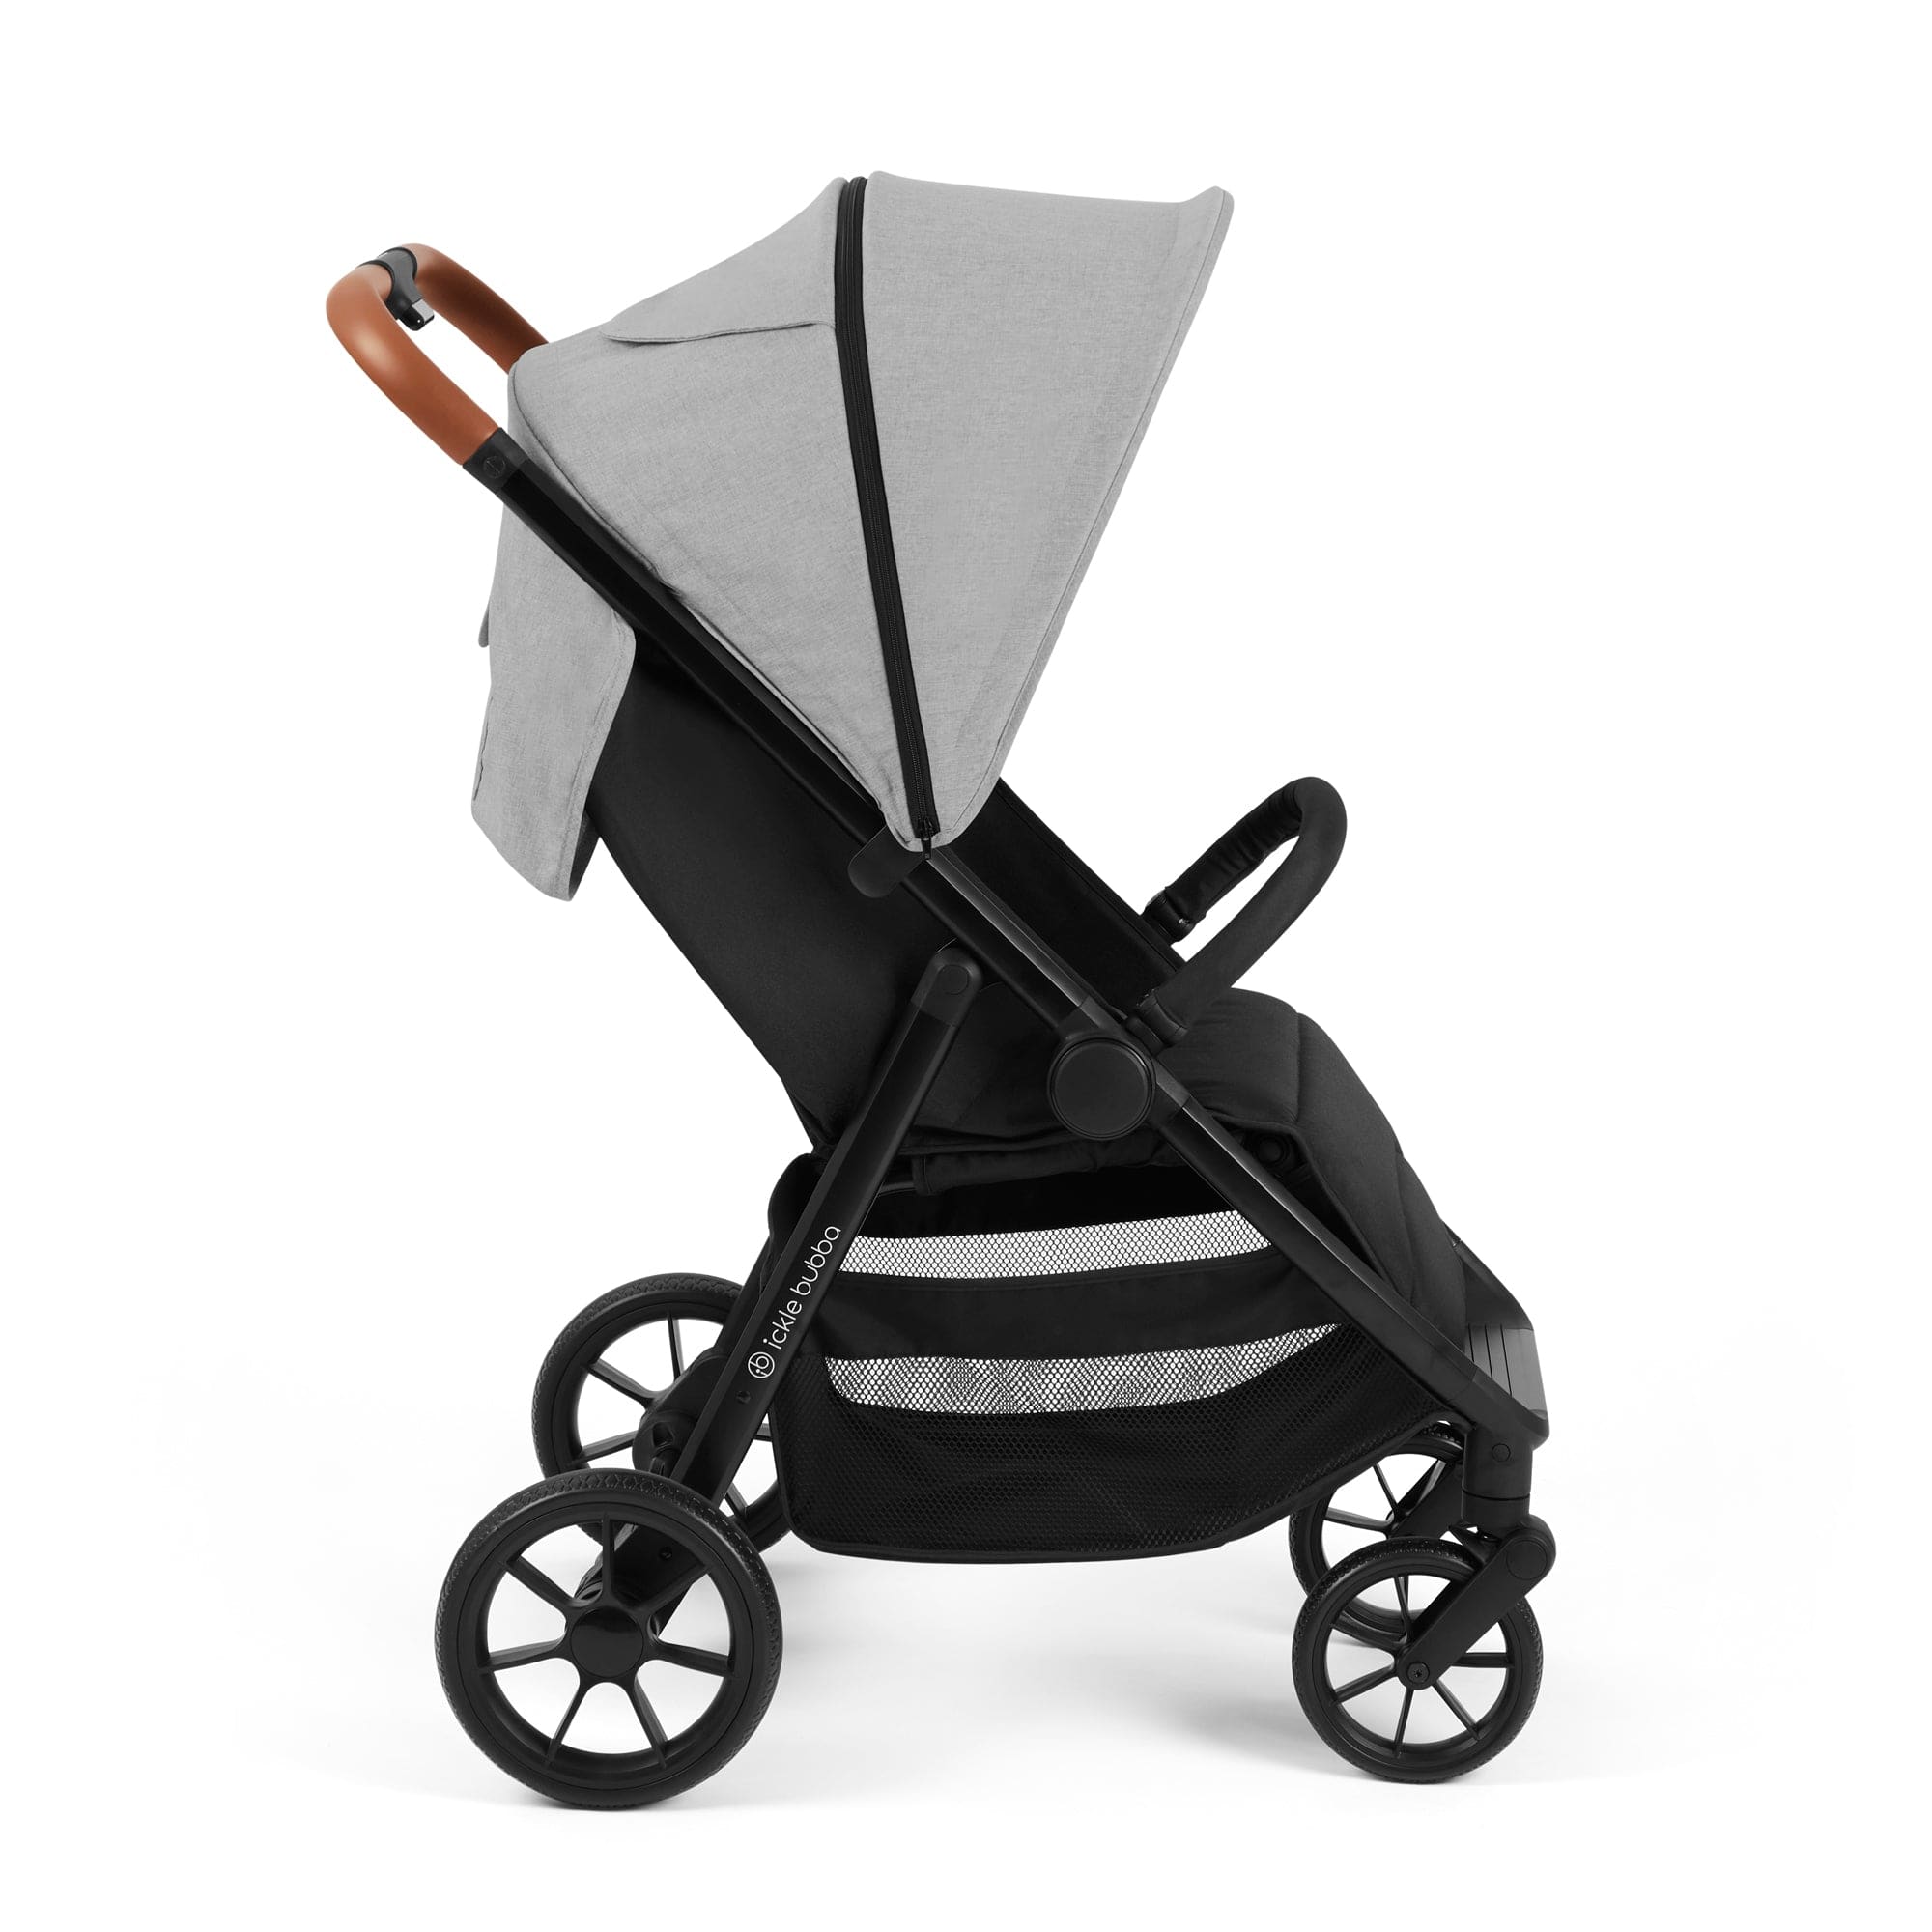 STOMP STRIDE MAX STROLLER in Pearl Grey Pushchairs & Buggies 15-006-200-147 5056515033885